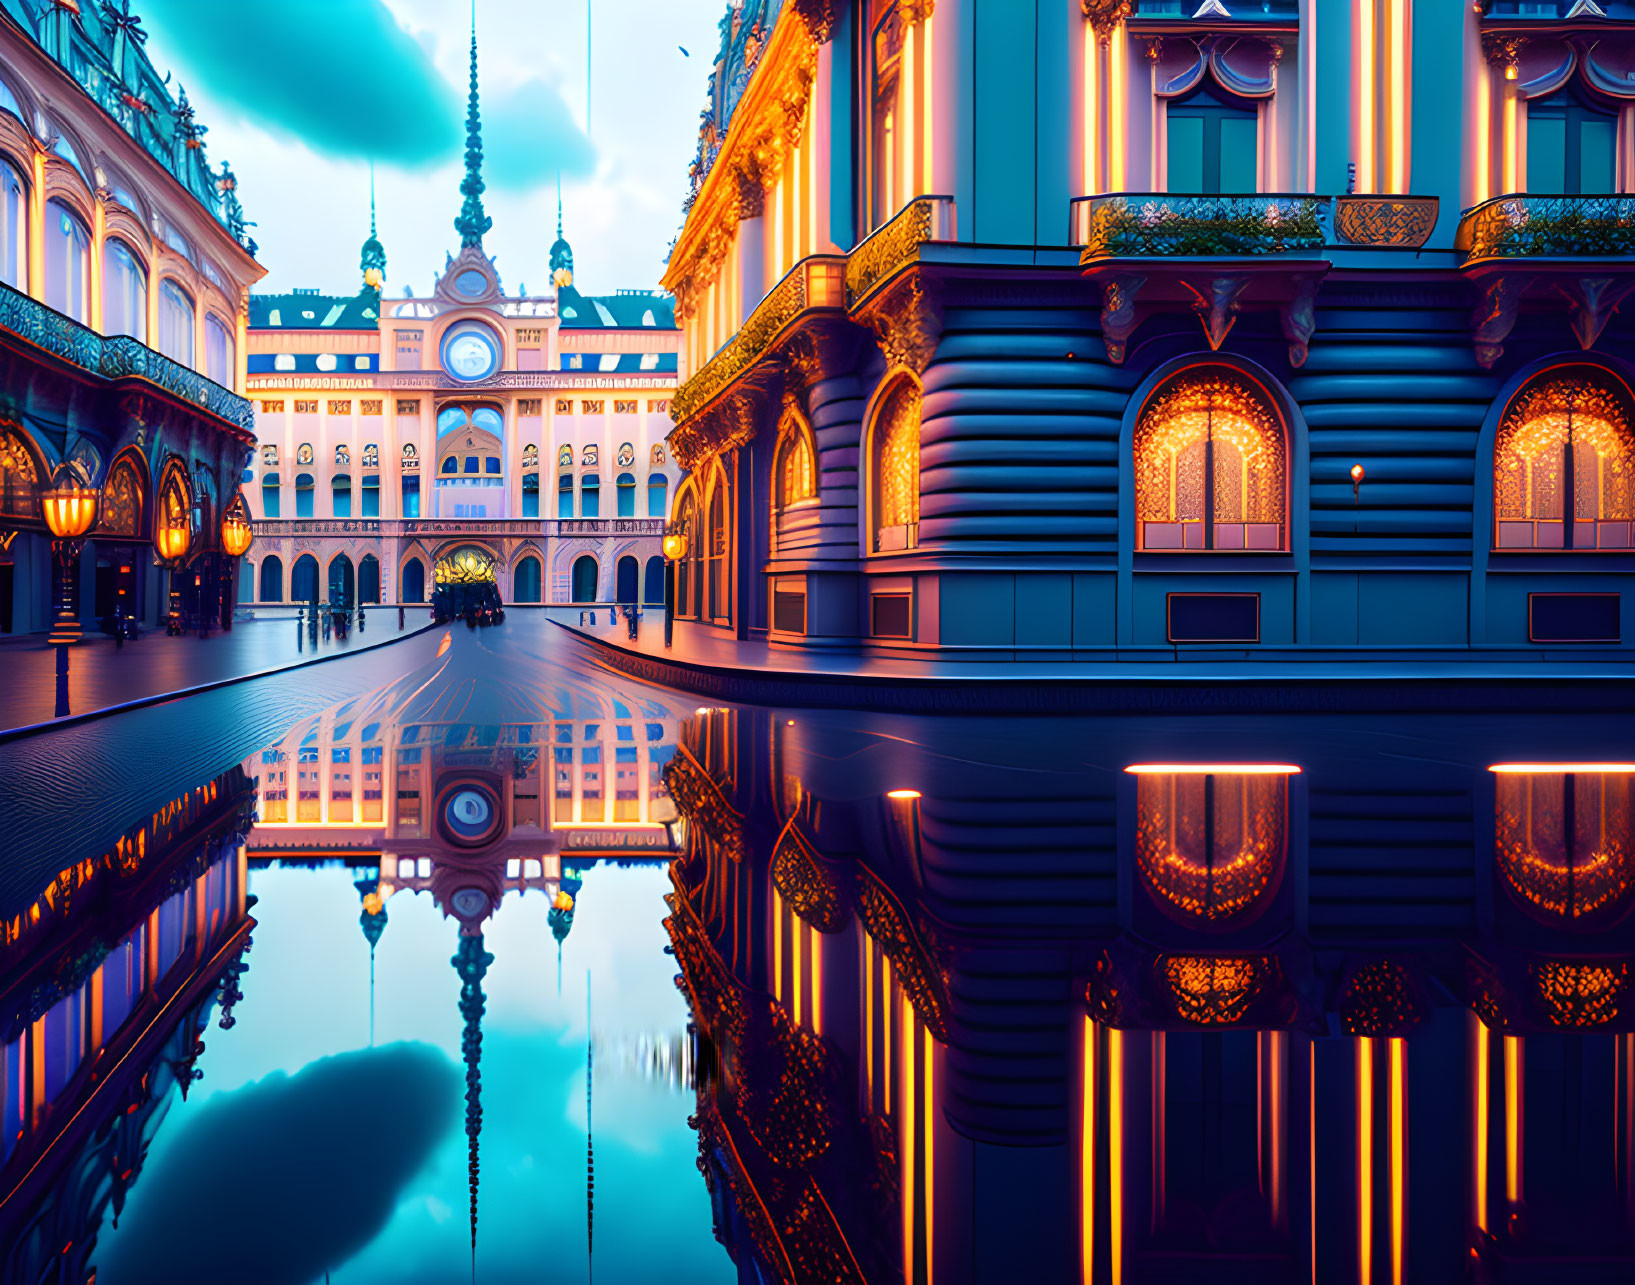 Ornate illuminated building with intricate facade reflected in glassy surface